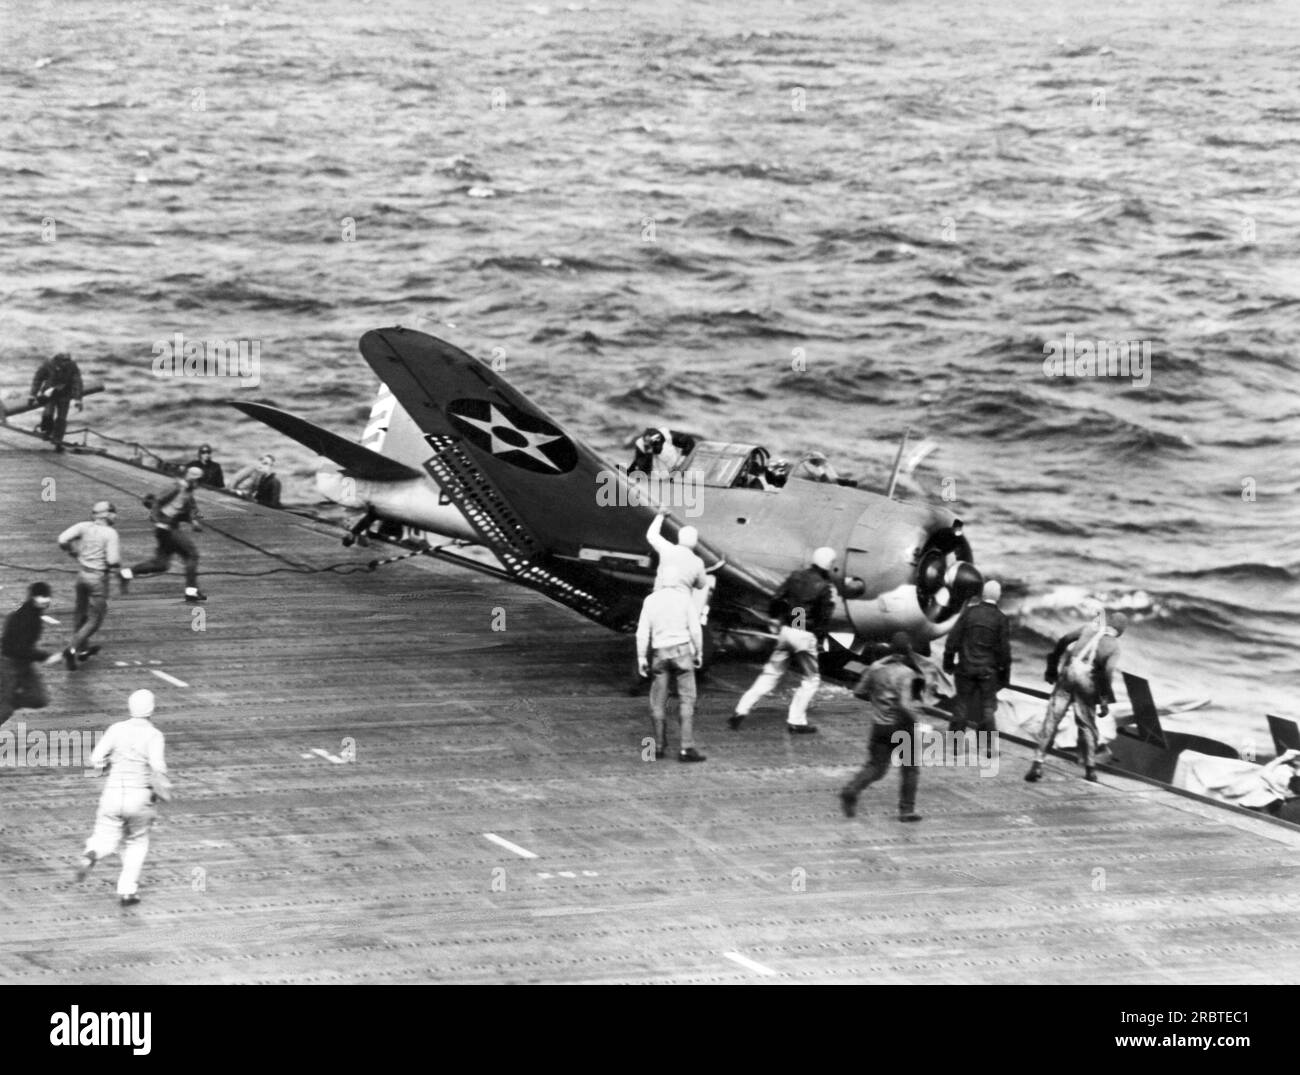 Pacific Ocean:  August, 1942 U.S. Navy scout bomber crashes while landing on the aircraft carrrier flight deck and ends up in the catwalk as ground crews rush to assist. Stock Photo